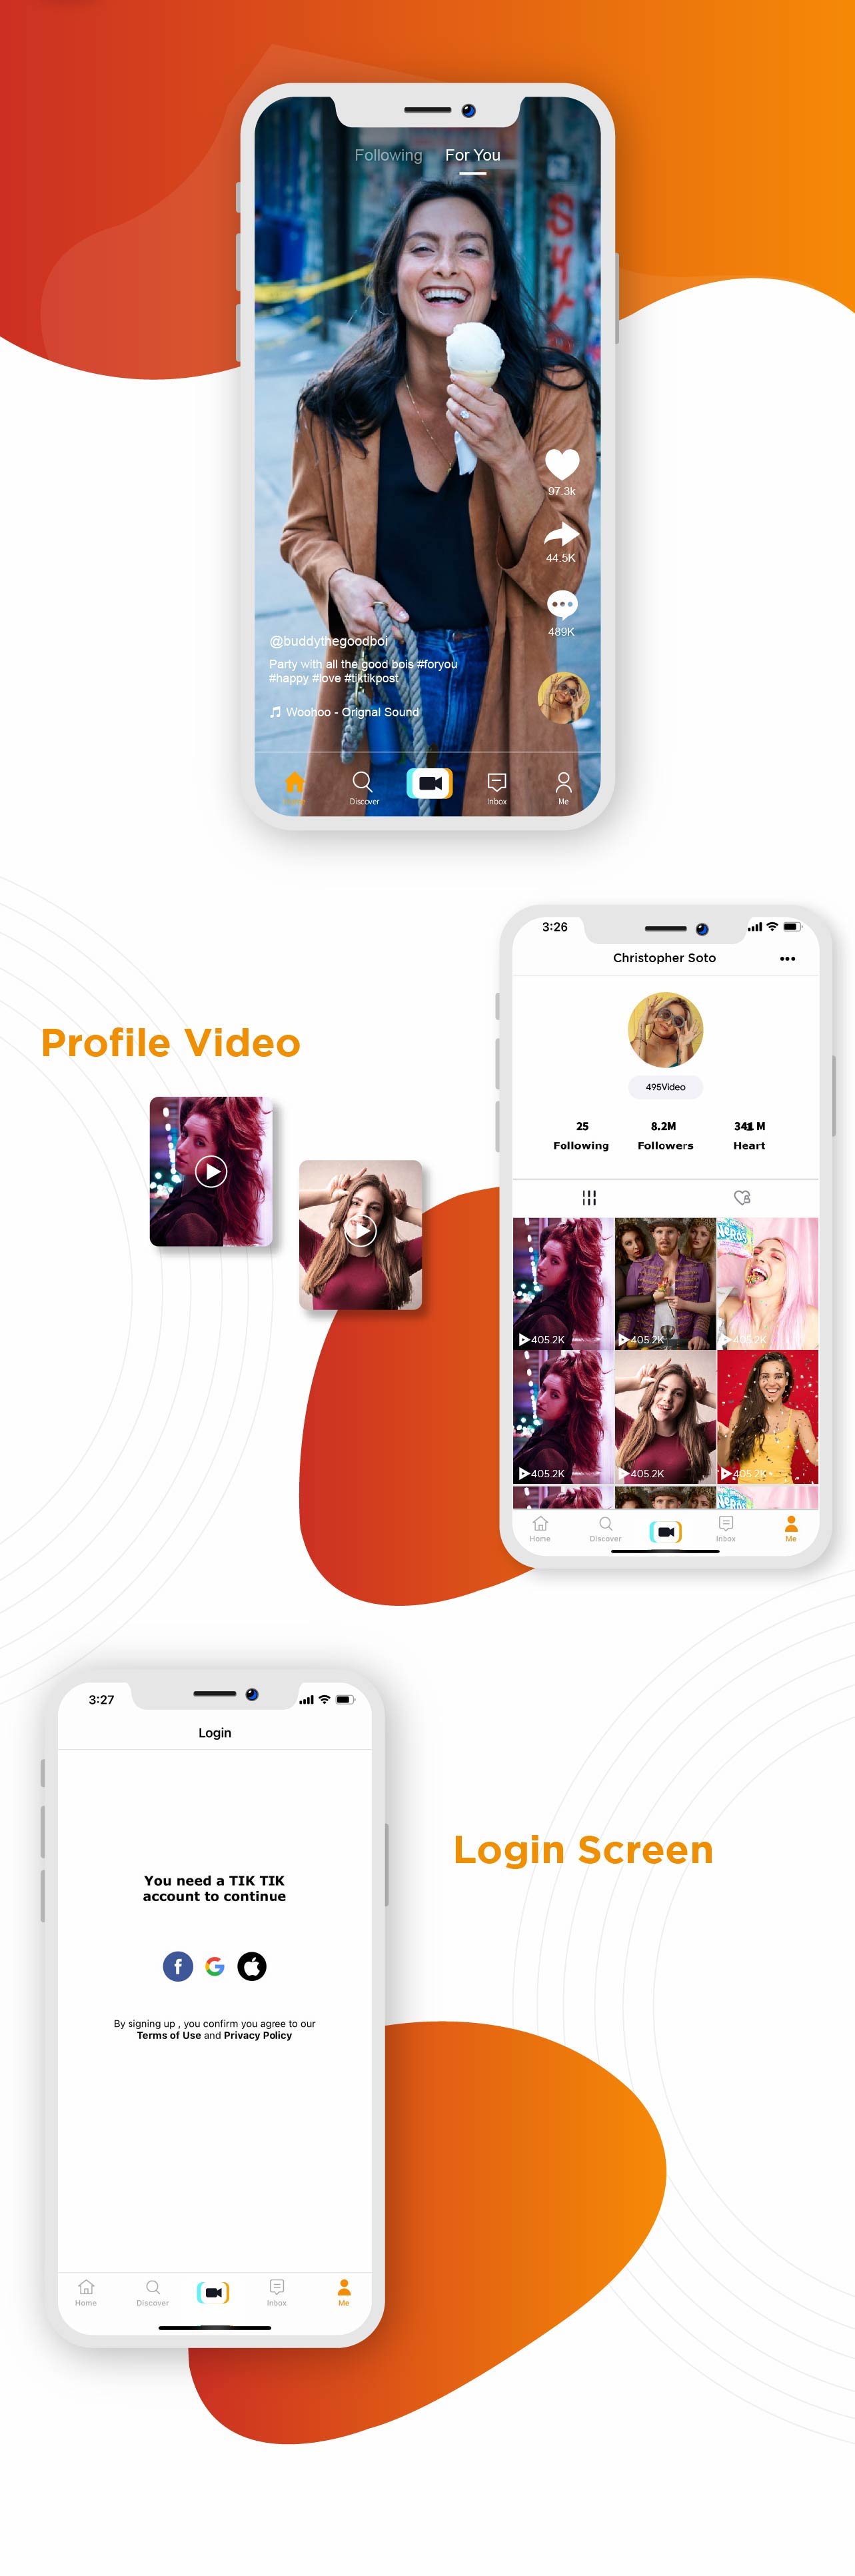 TicTic - IOS media app for creating and sharing short videos - 5